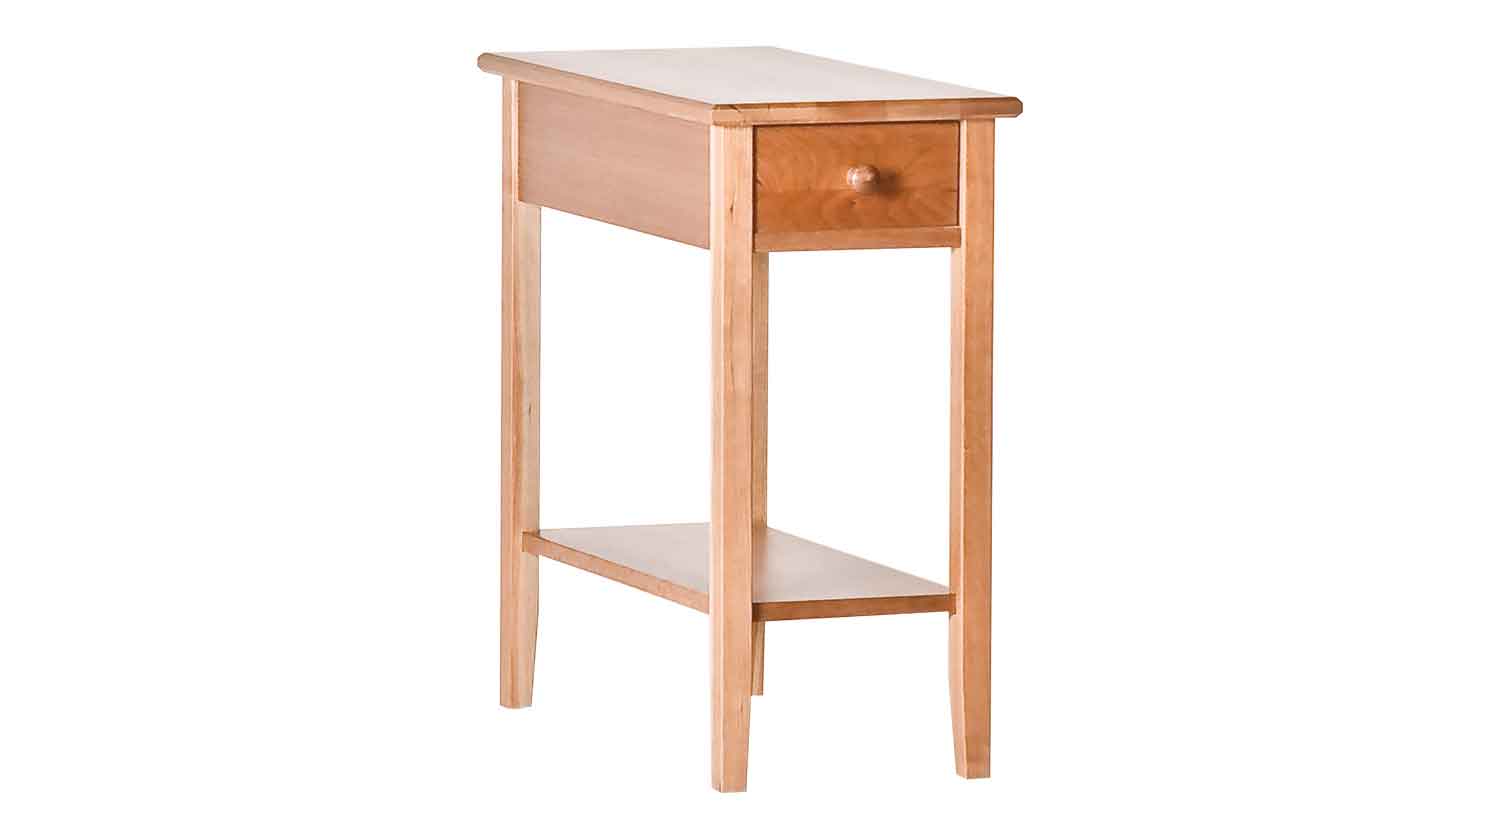 circle furniture shaker narrow side table accent tables long kids end chairside asus maroc triangle shaped corner glass top small desk pier one dining bench astoria patio tread